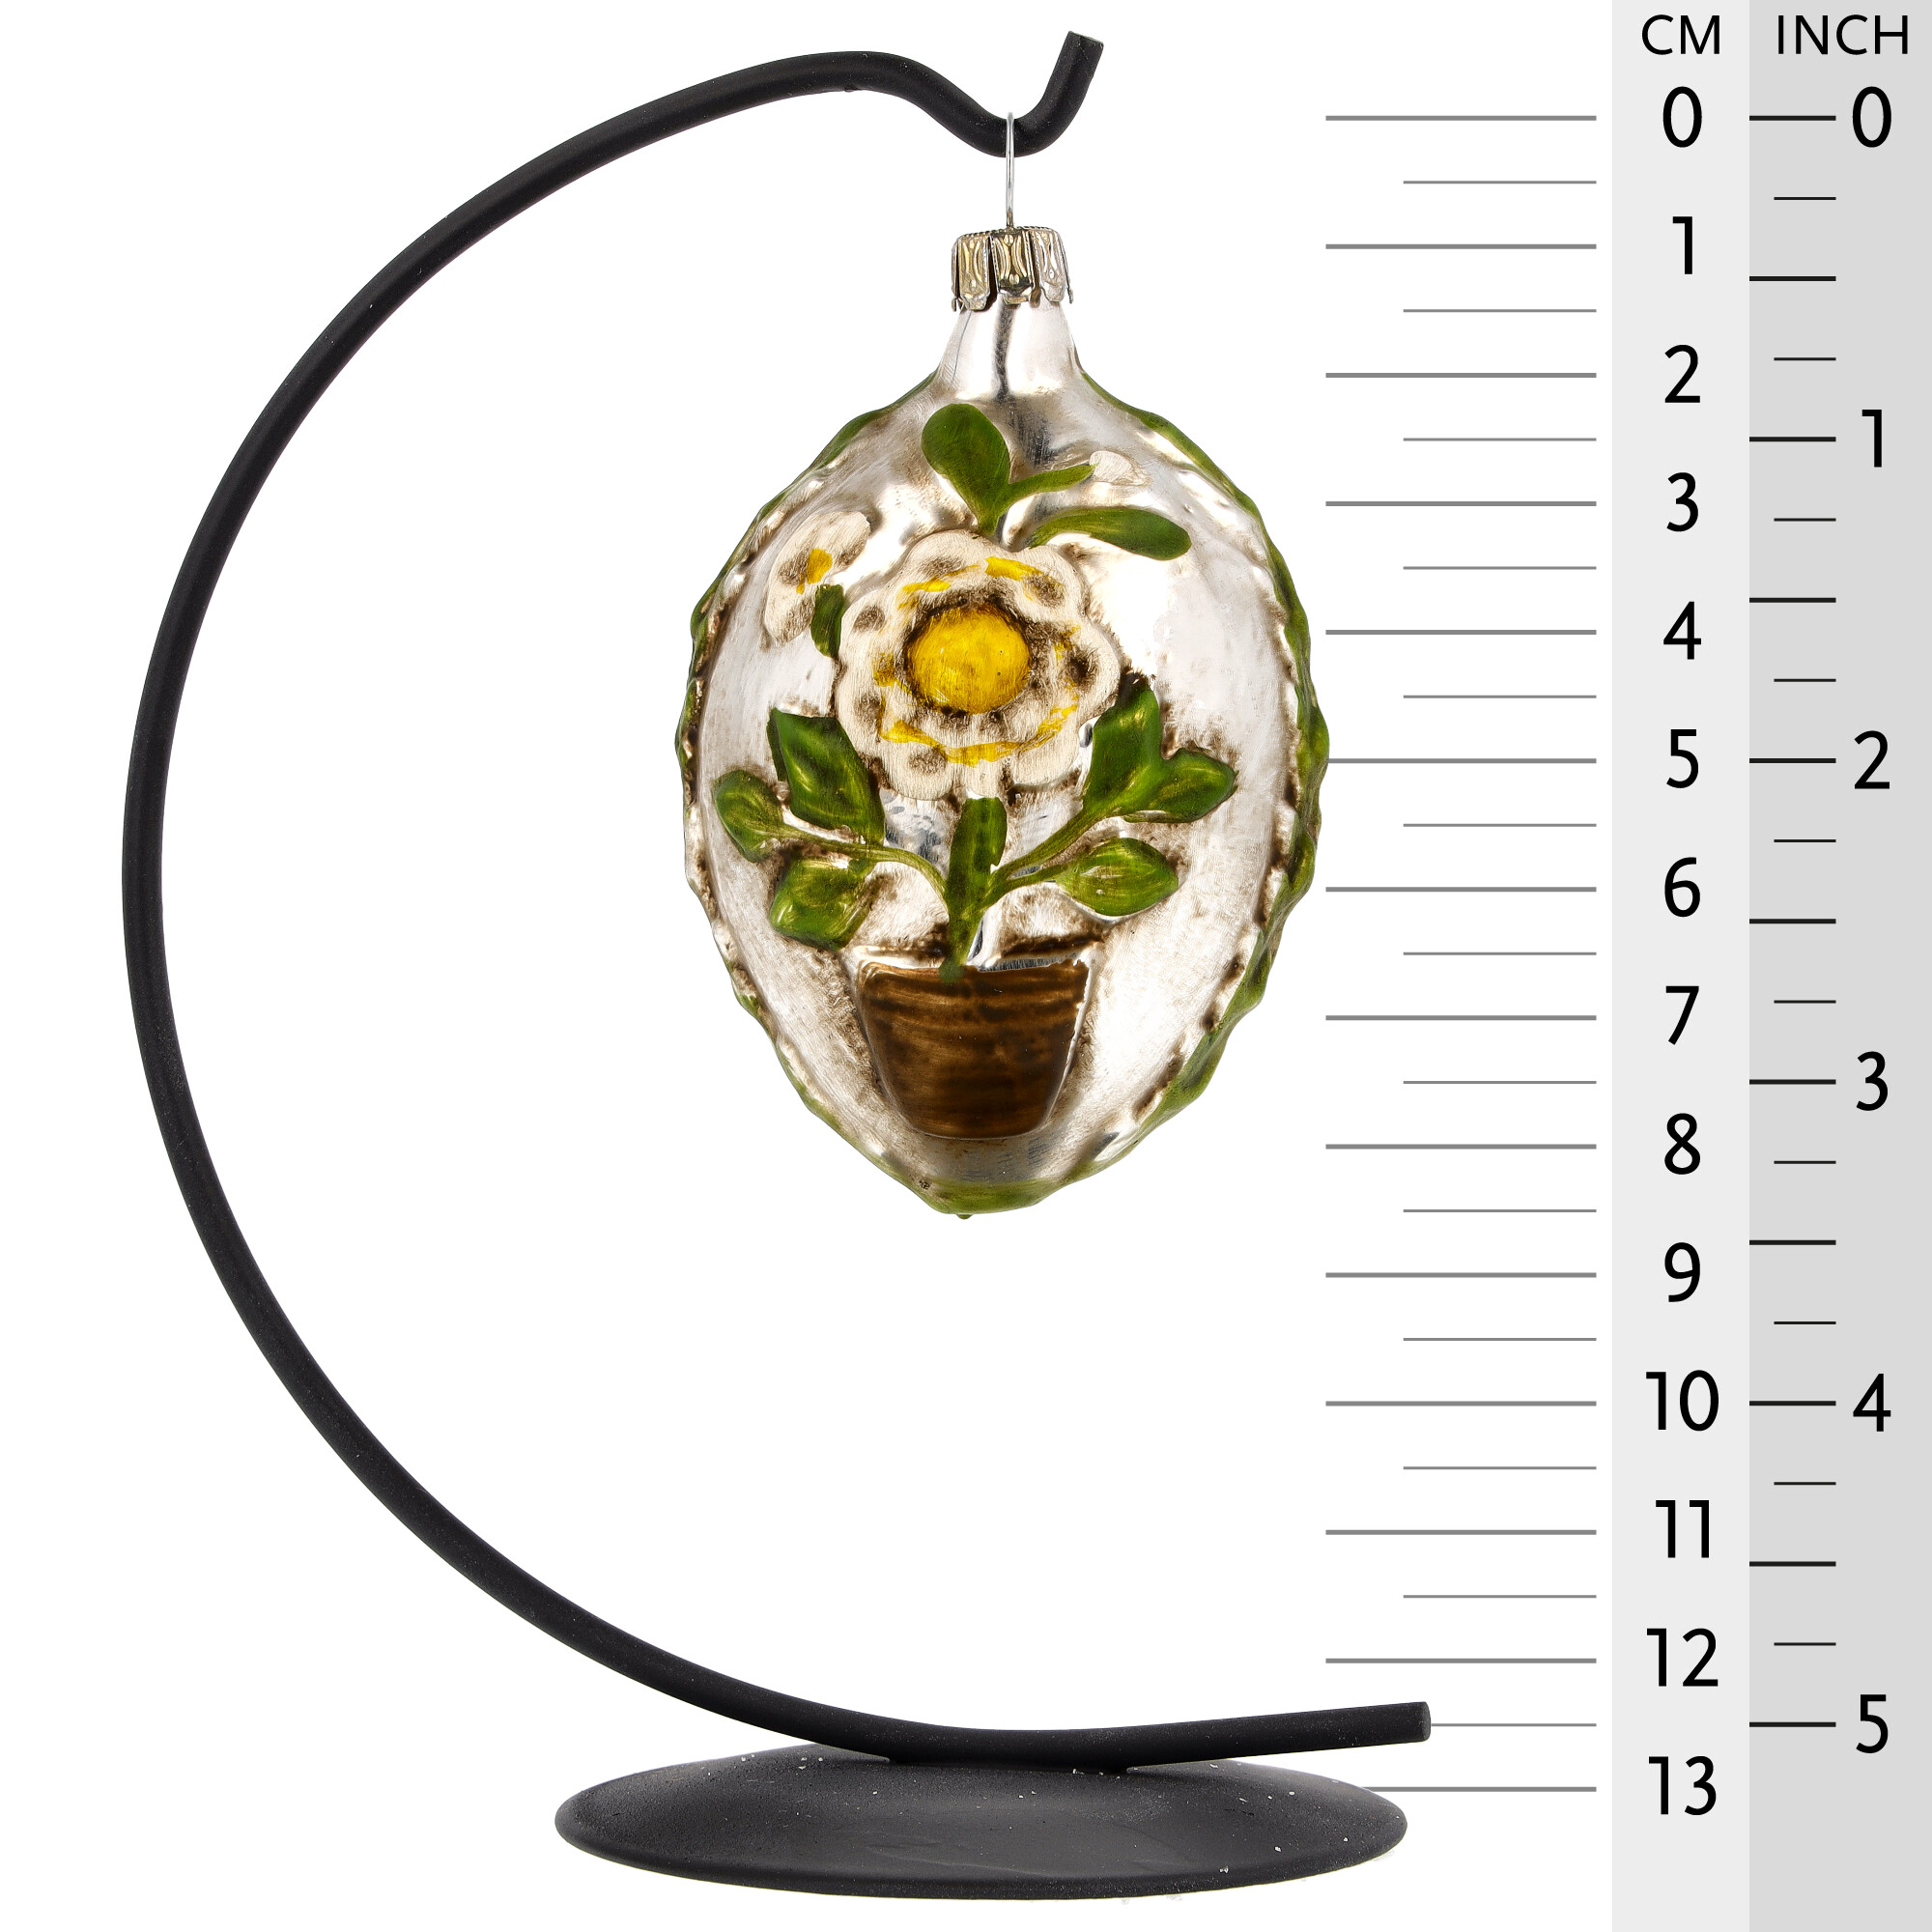 Retro Vintage style Christmas Glass Ornament - Egg with flowerpot and strawberries